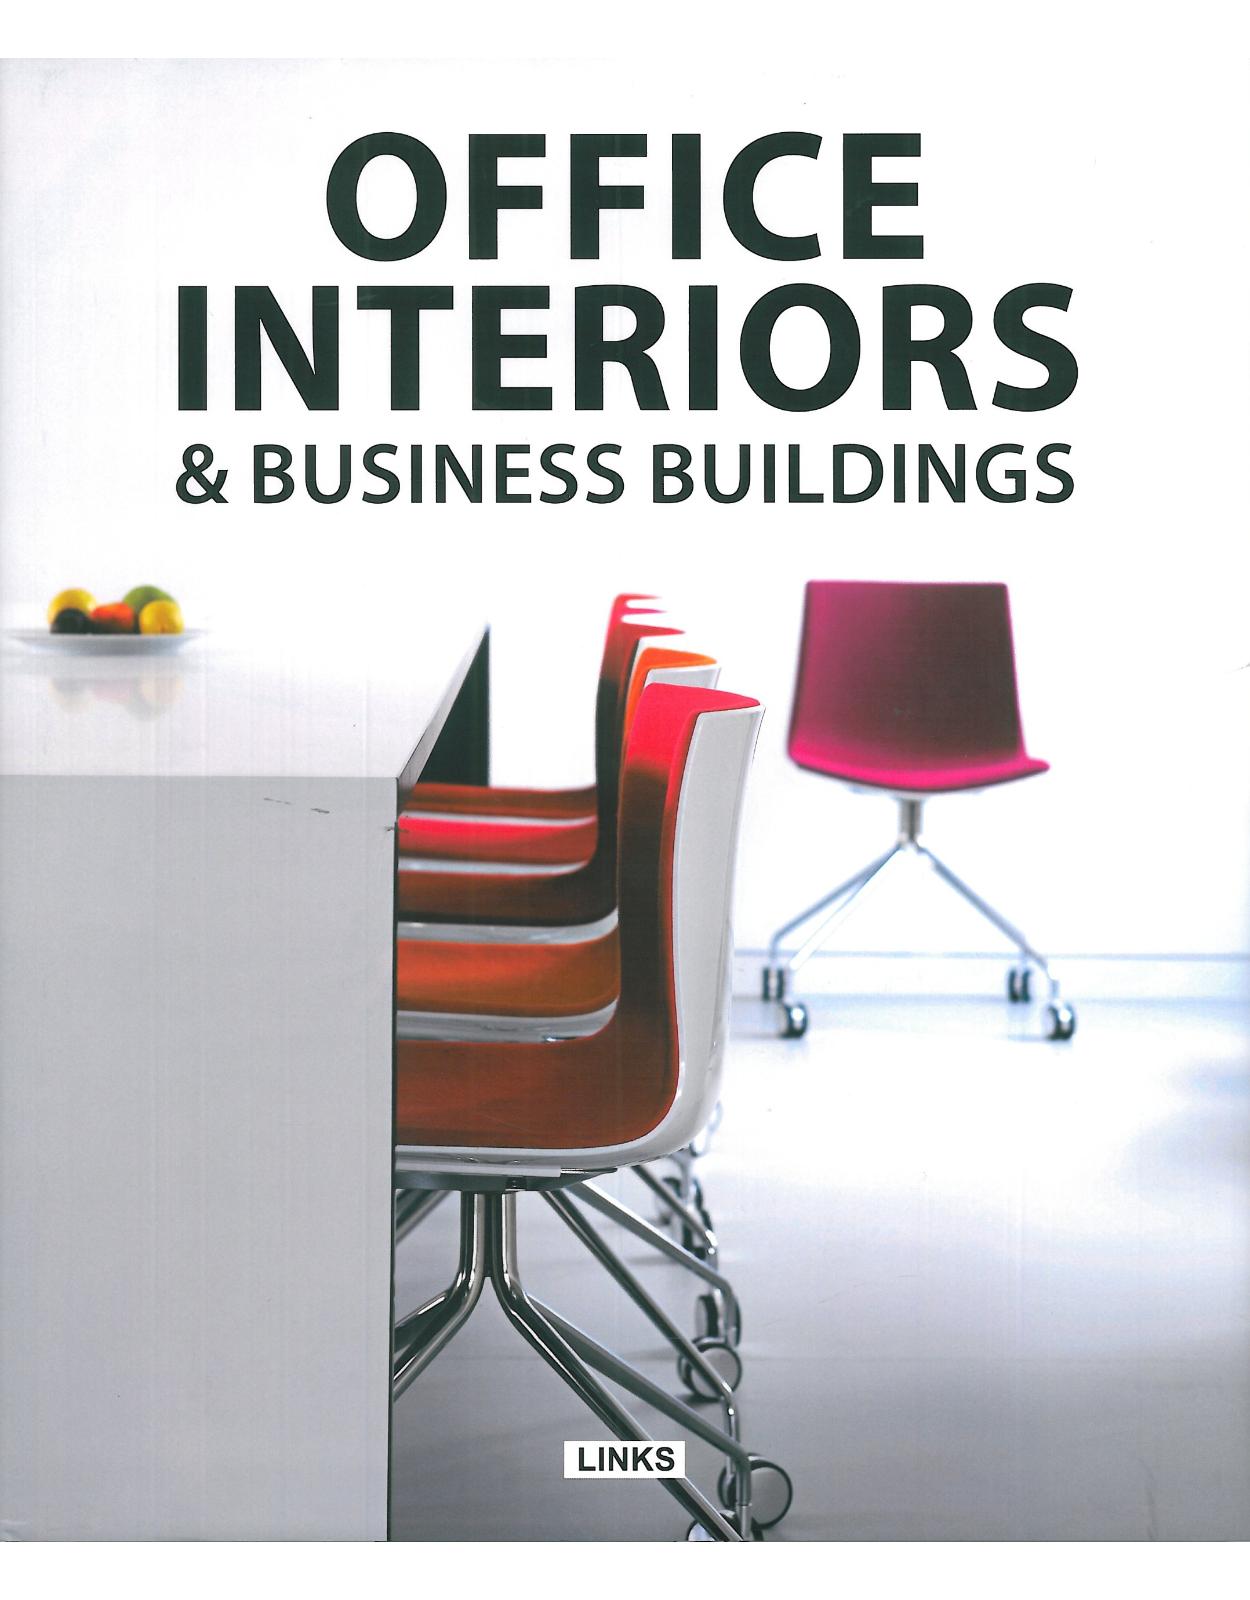 Office Interiors & Business Buildings